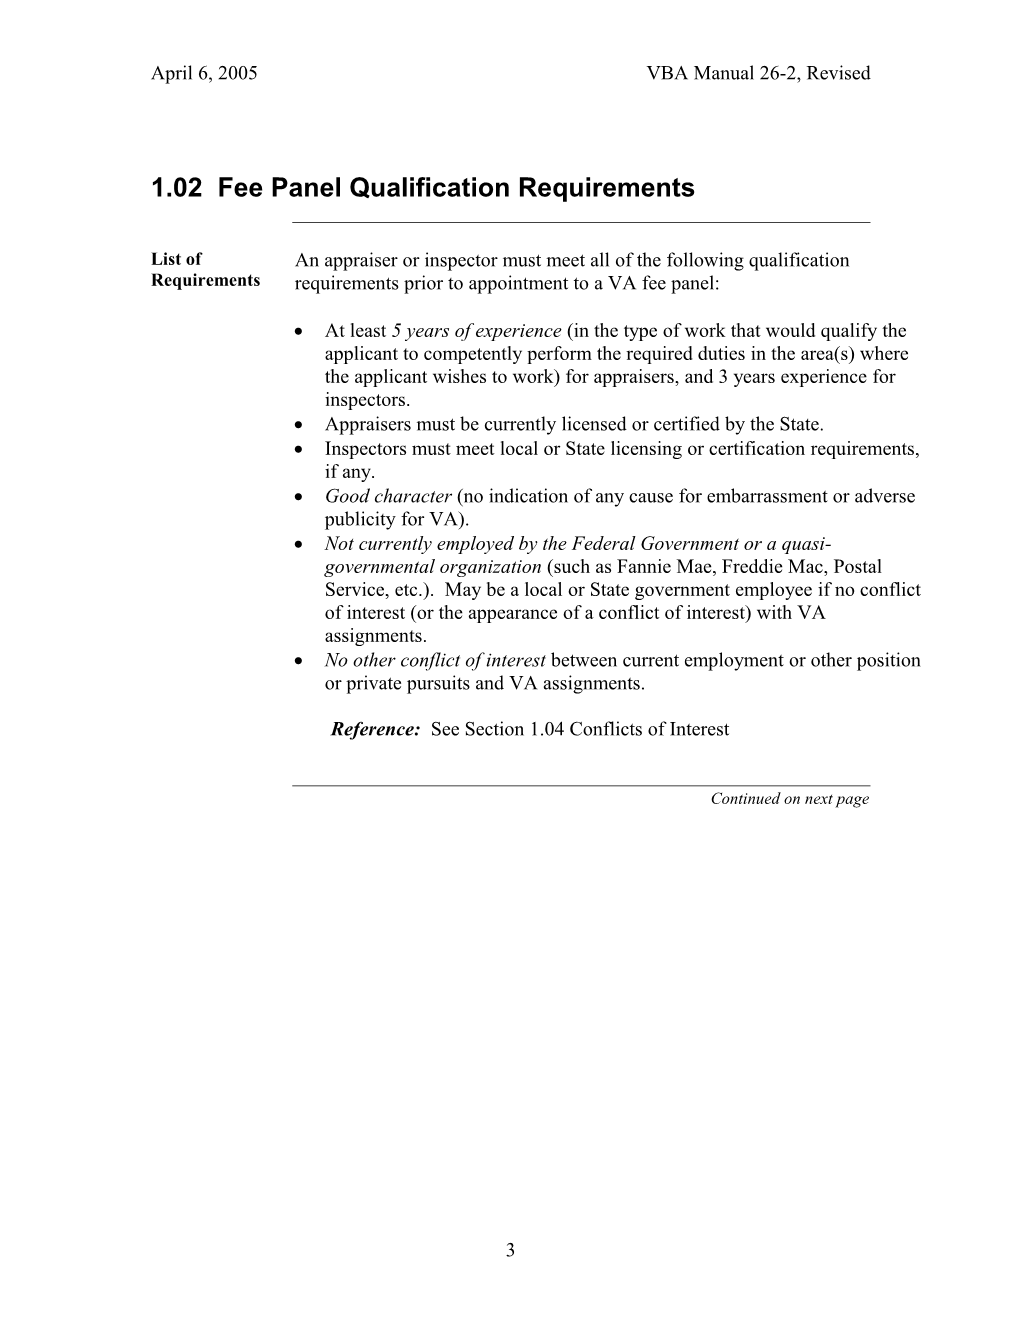 1.01 Fee Panels and Fee Personnel